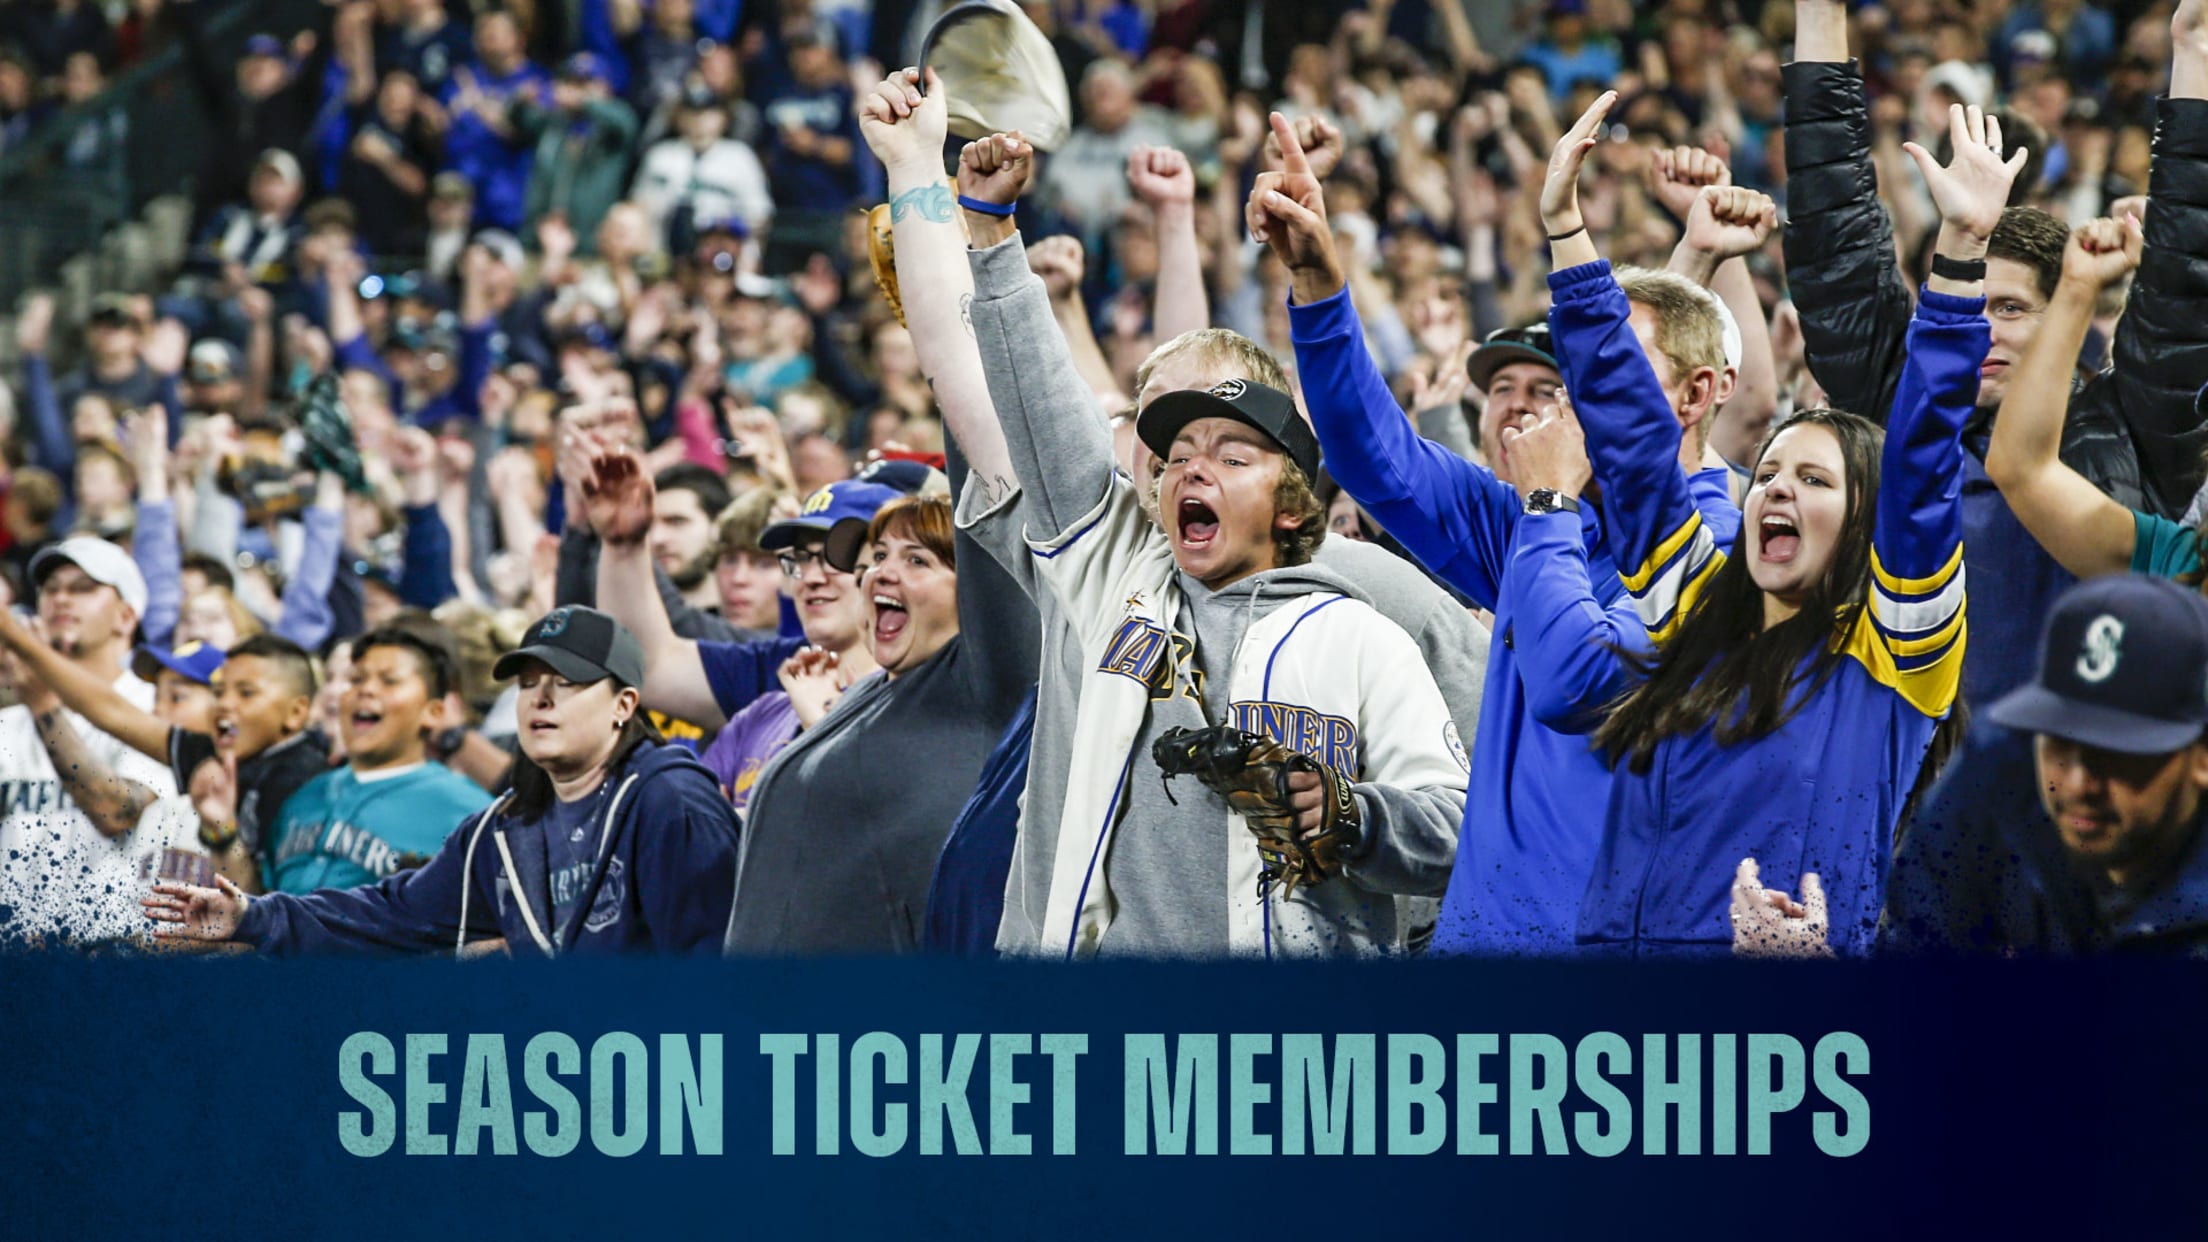 Seattle Mariners - Spring Training tickets go on sale Monday, November 28!  🌵☀️ Get early access by signing up for Mariners Mail at Mariners.com/Mail  or by texting 'MARINERS' to 24247, and view